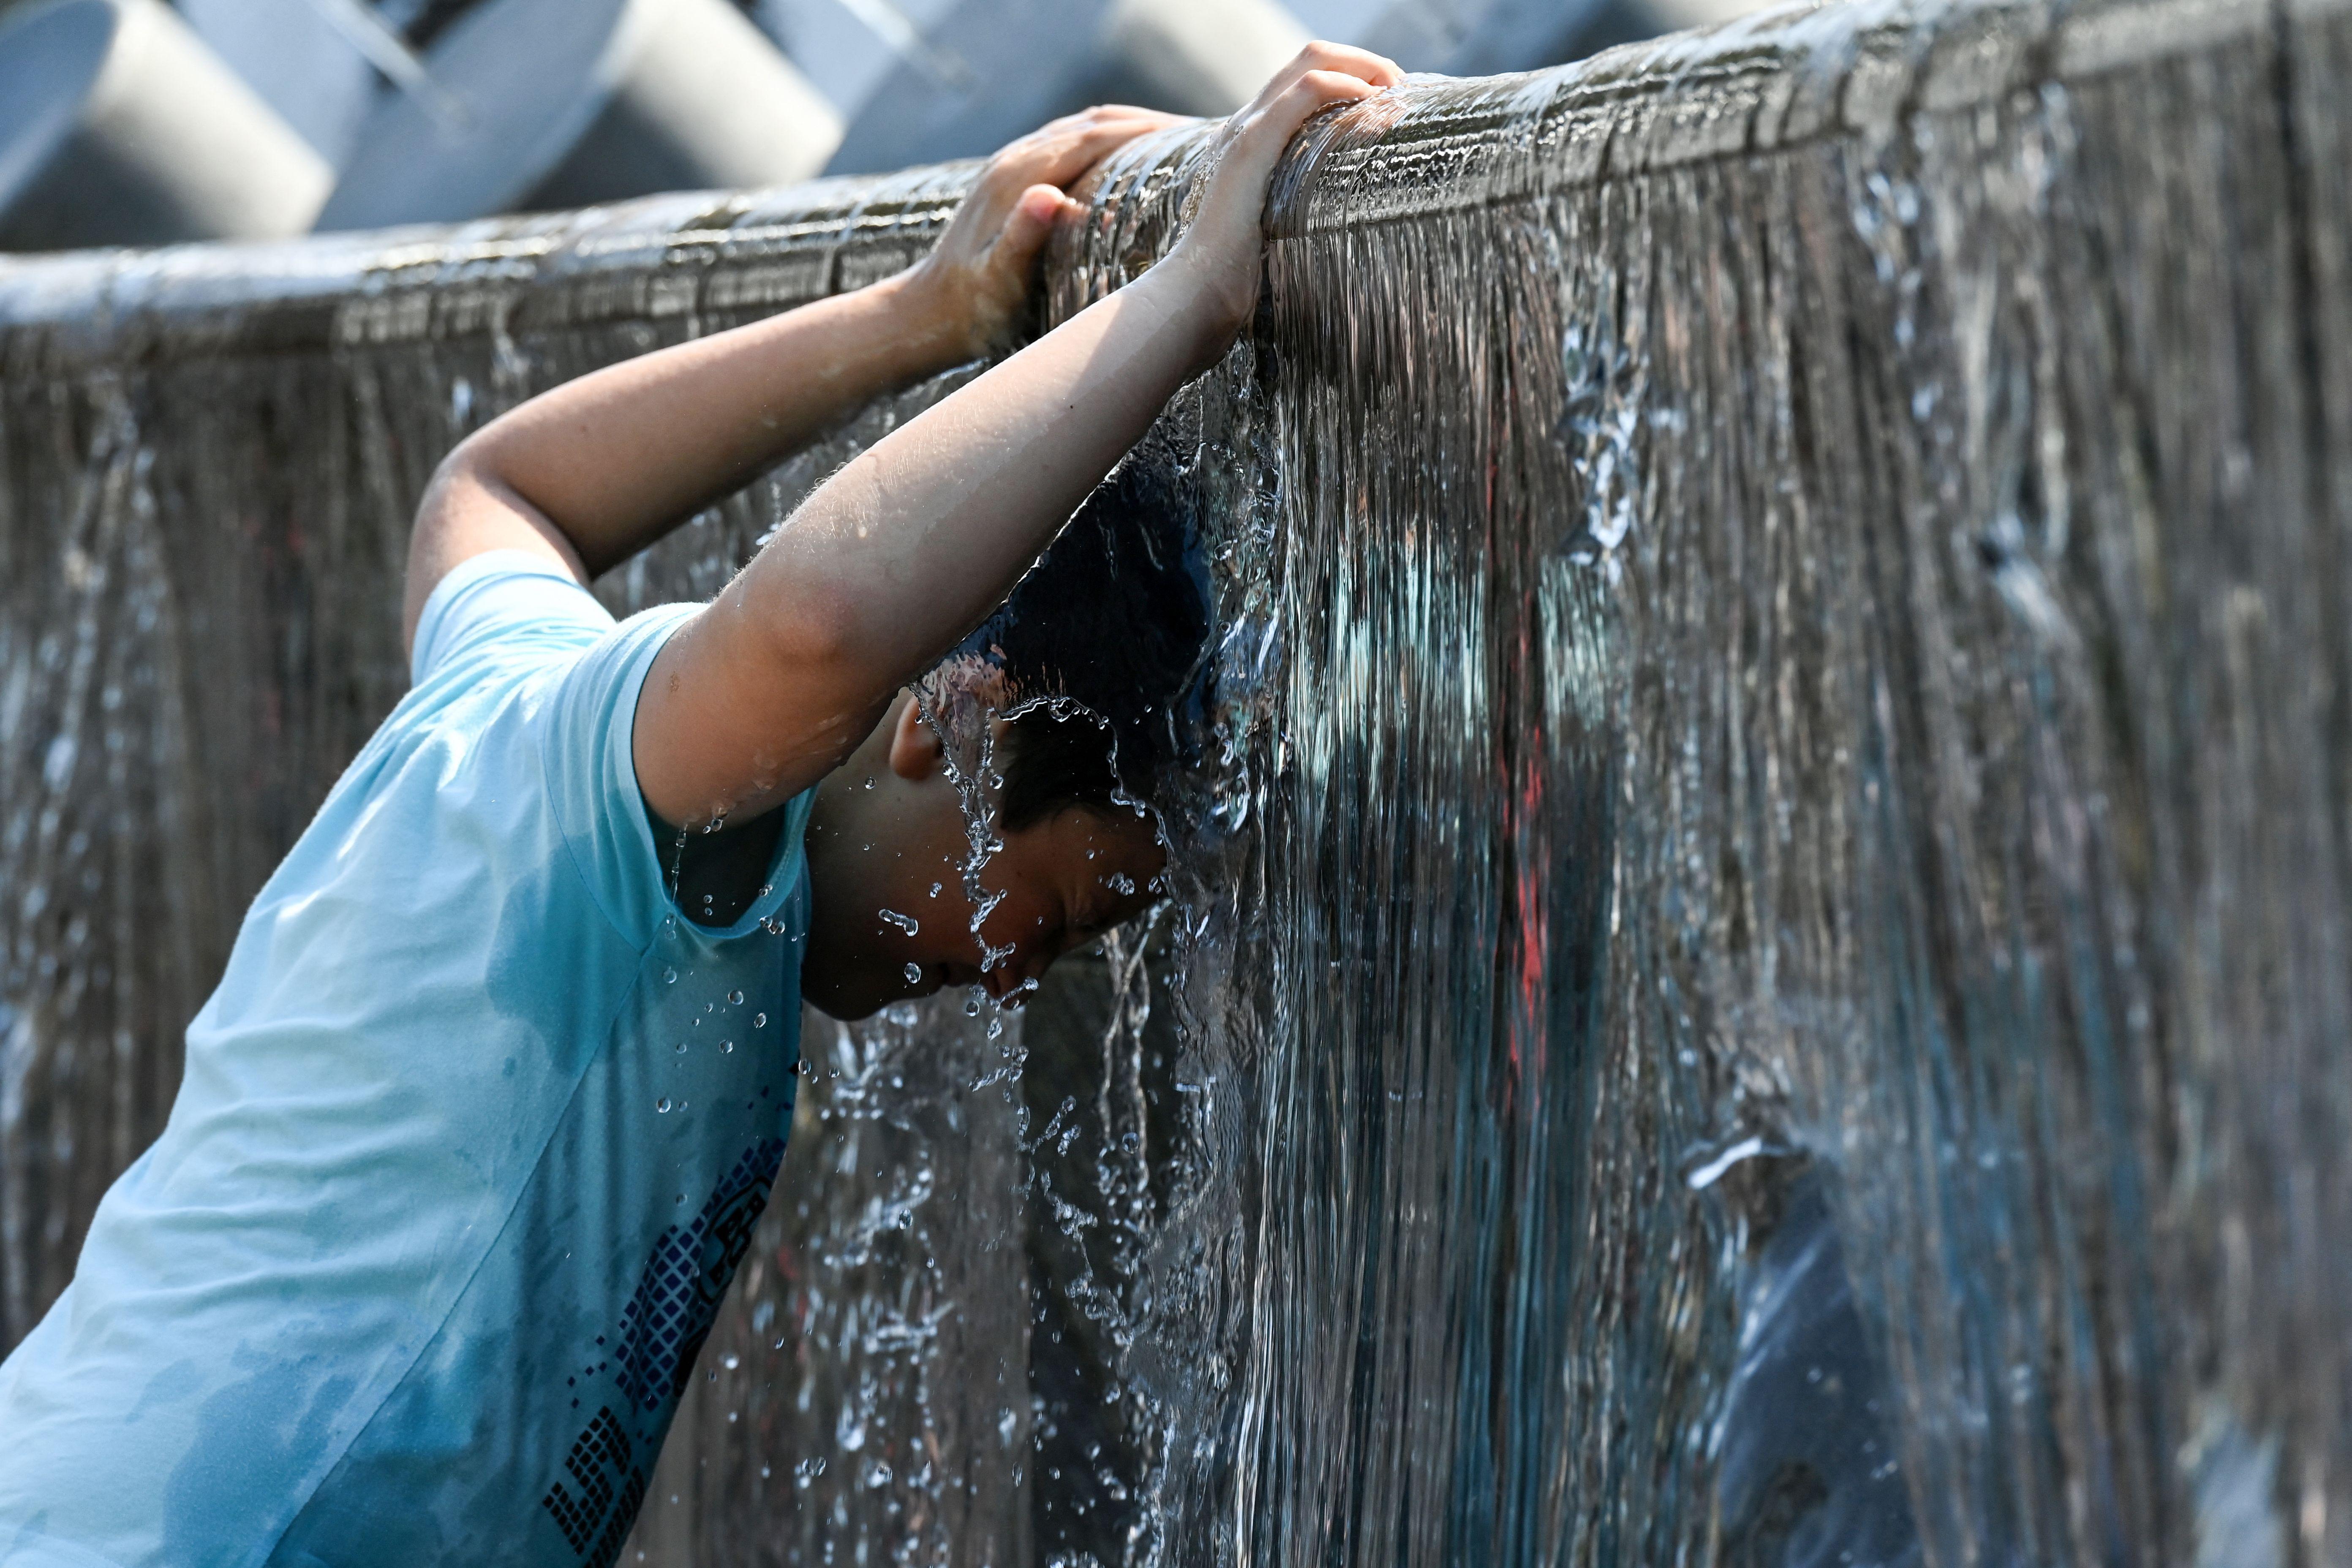 A boy in a blue T-shirt sticks his head under the water pouring off a fountain to cool off.